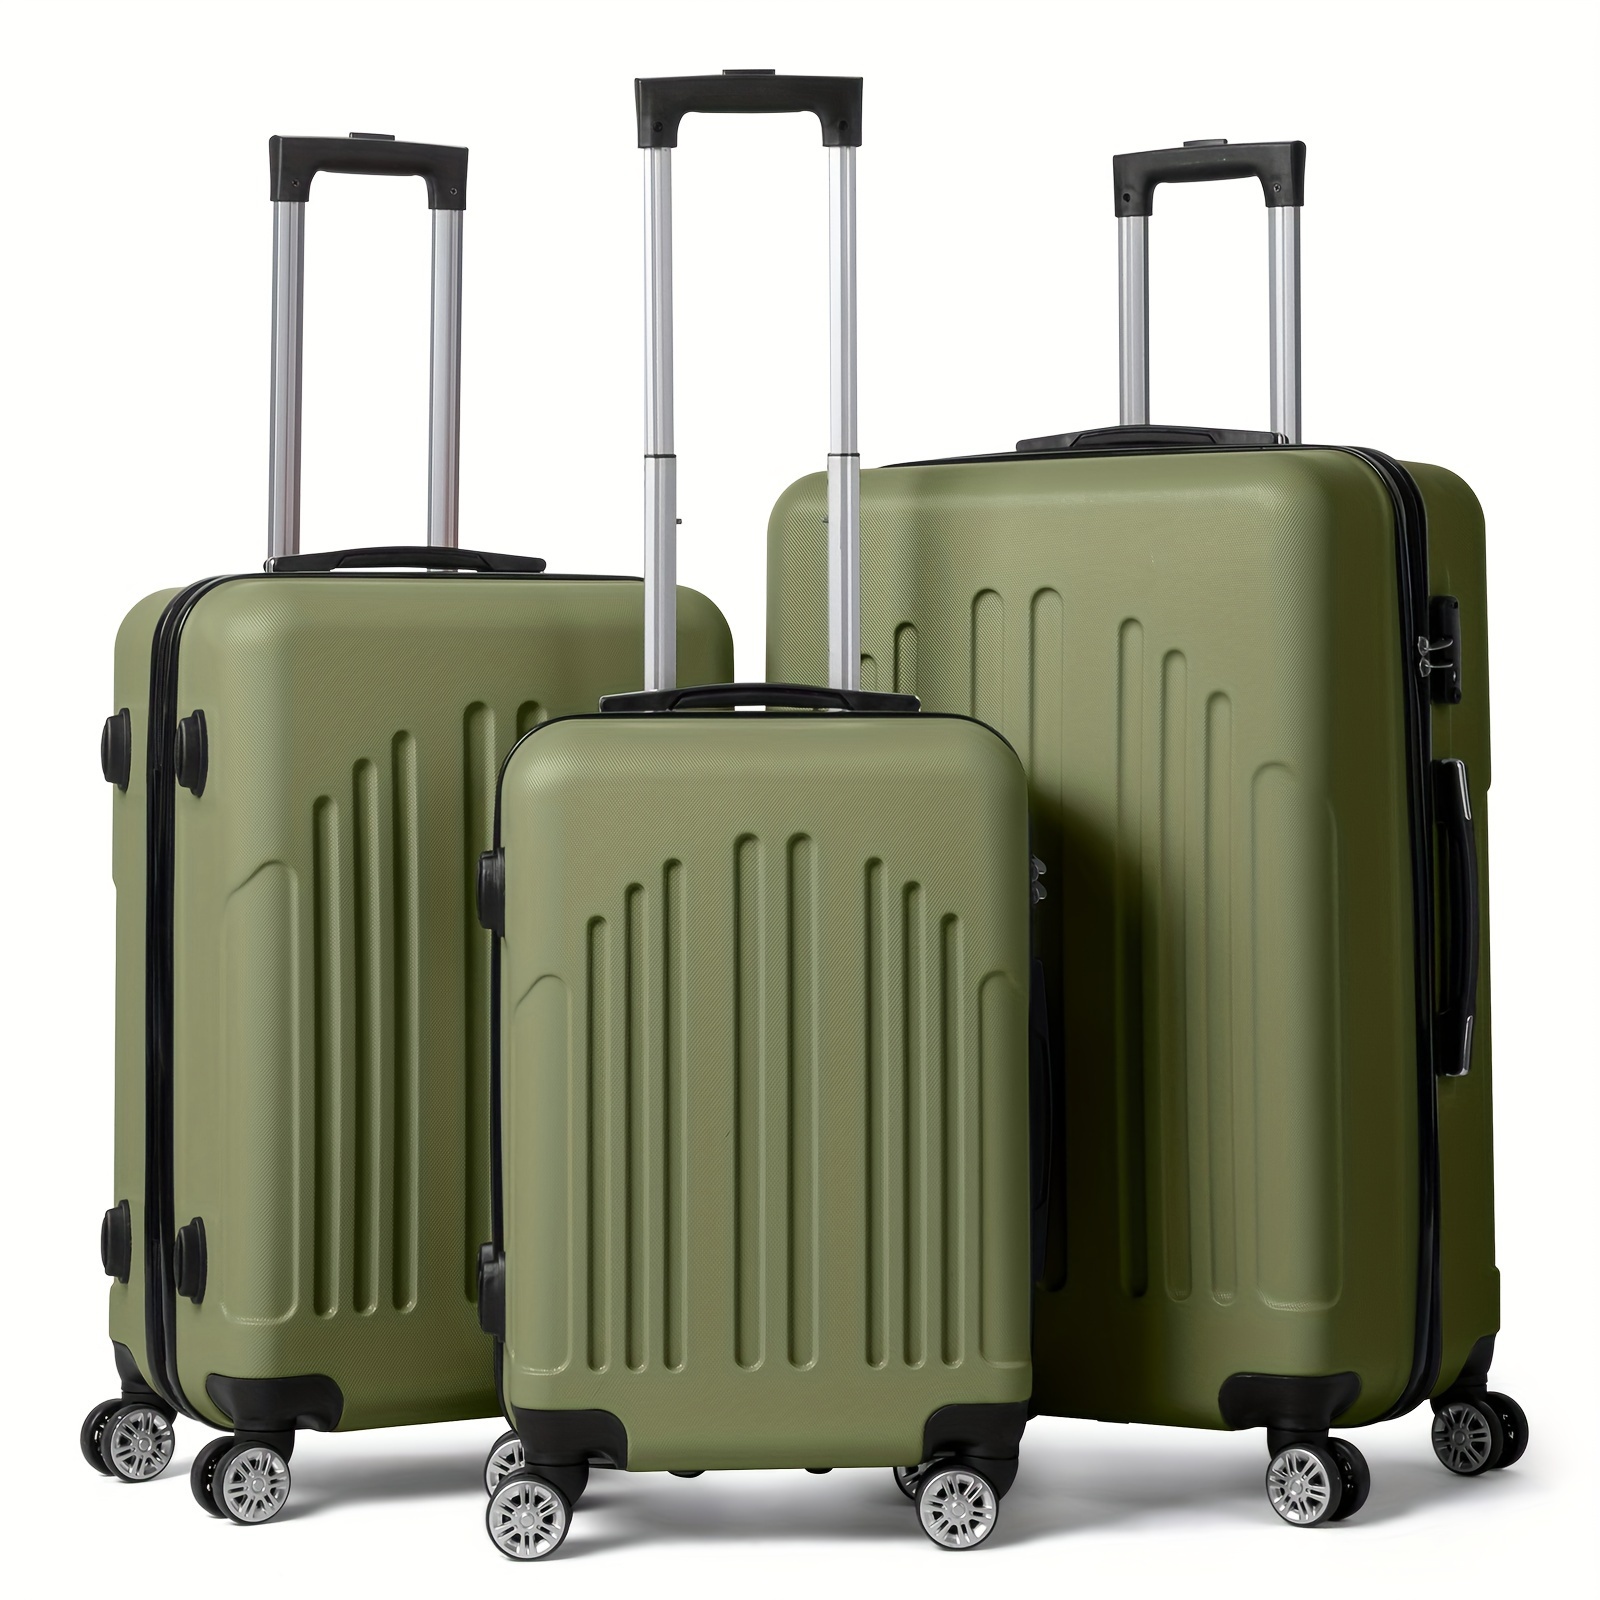 

3pcs Striped Abs Luggage Suitcase, Carry On Lightweight Trolley Case, Universal Wheel Travel Case 20/24/28inch